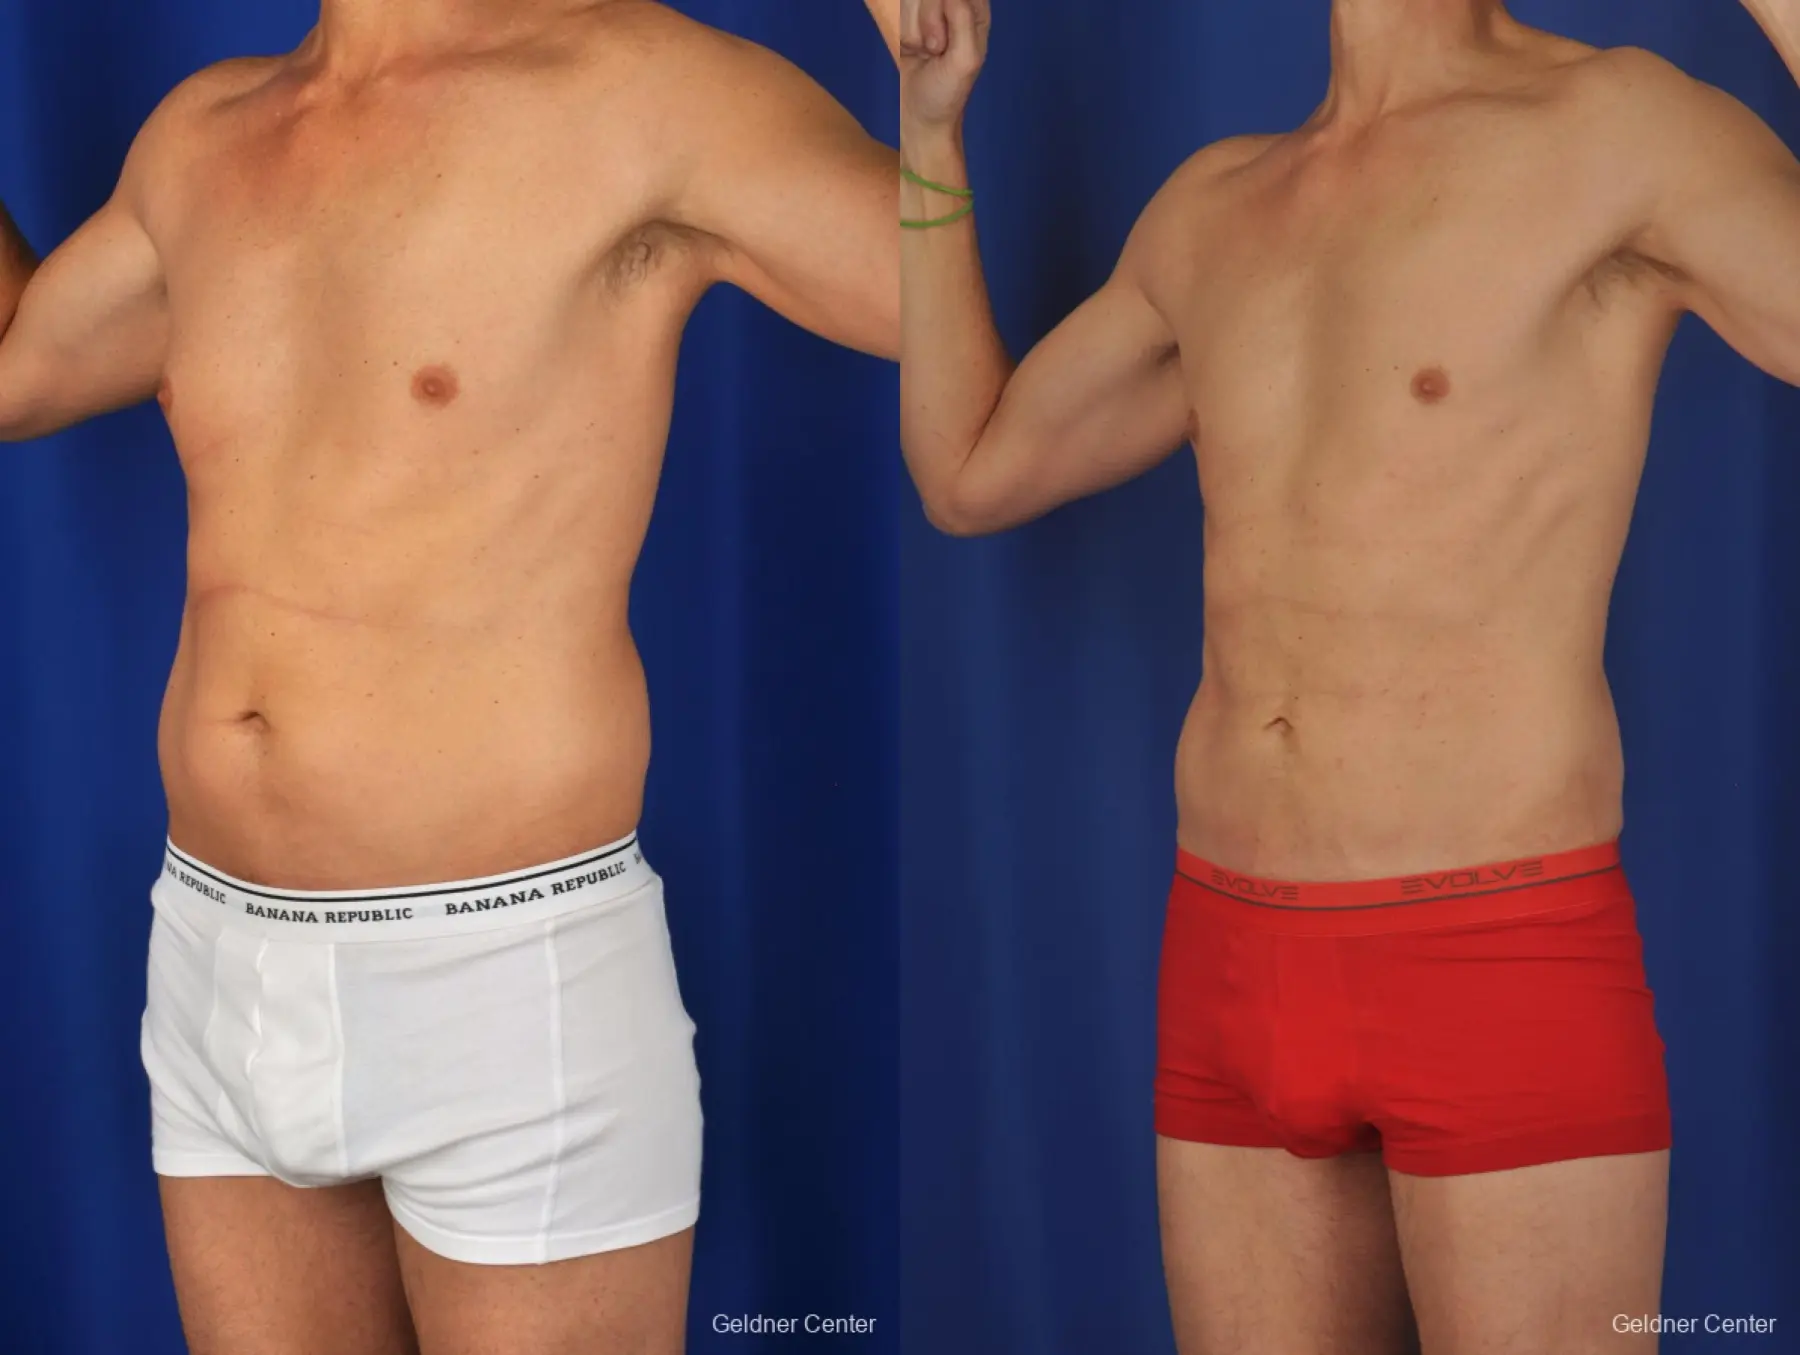 Liposuction For Men: Patient 2 - Before and After 5